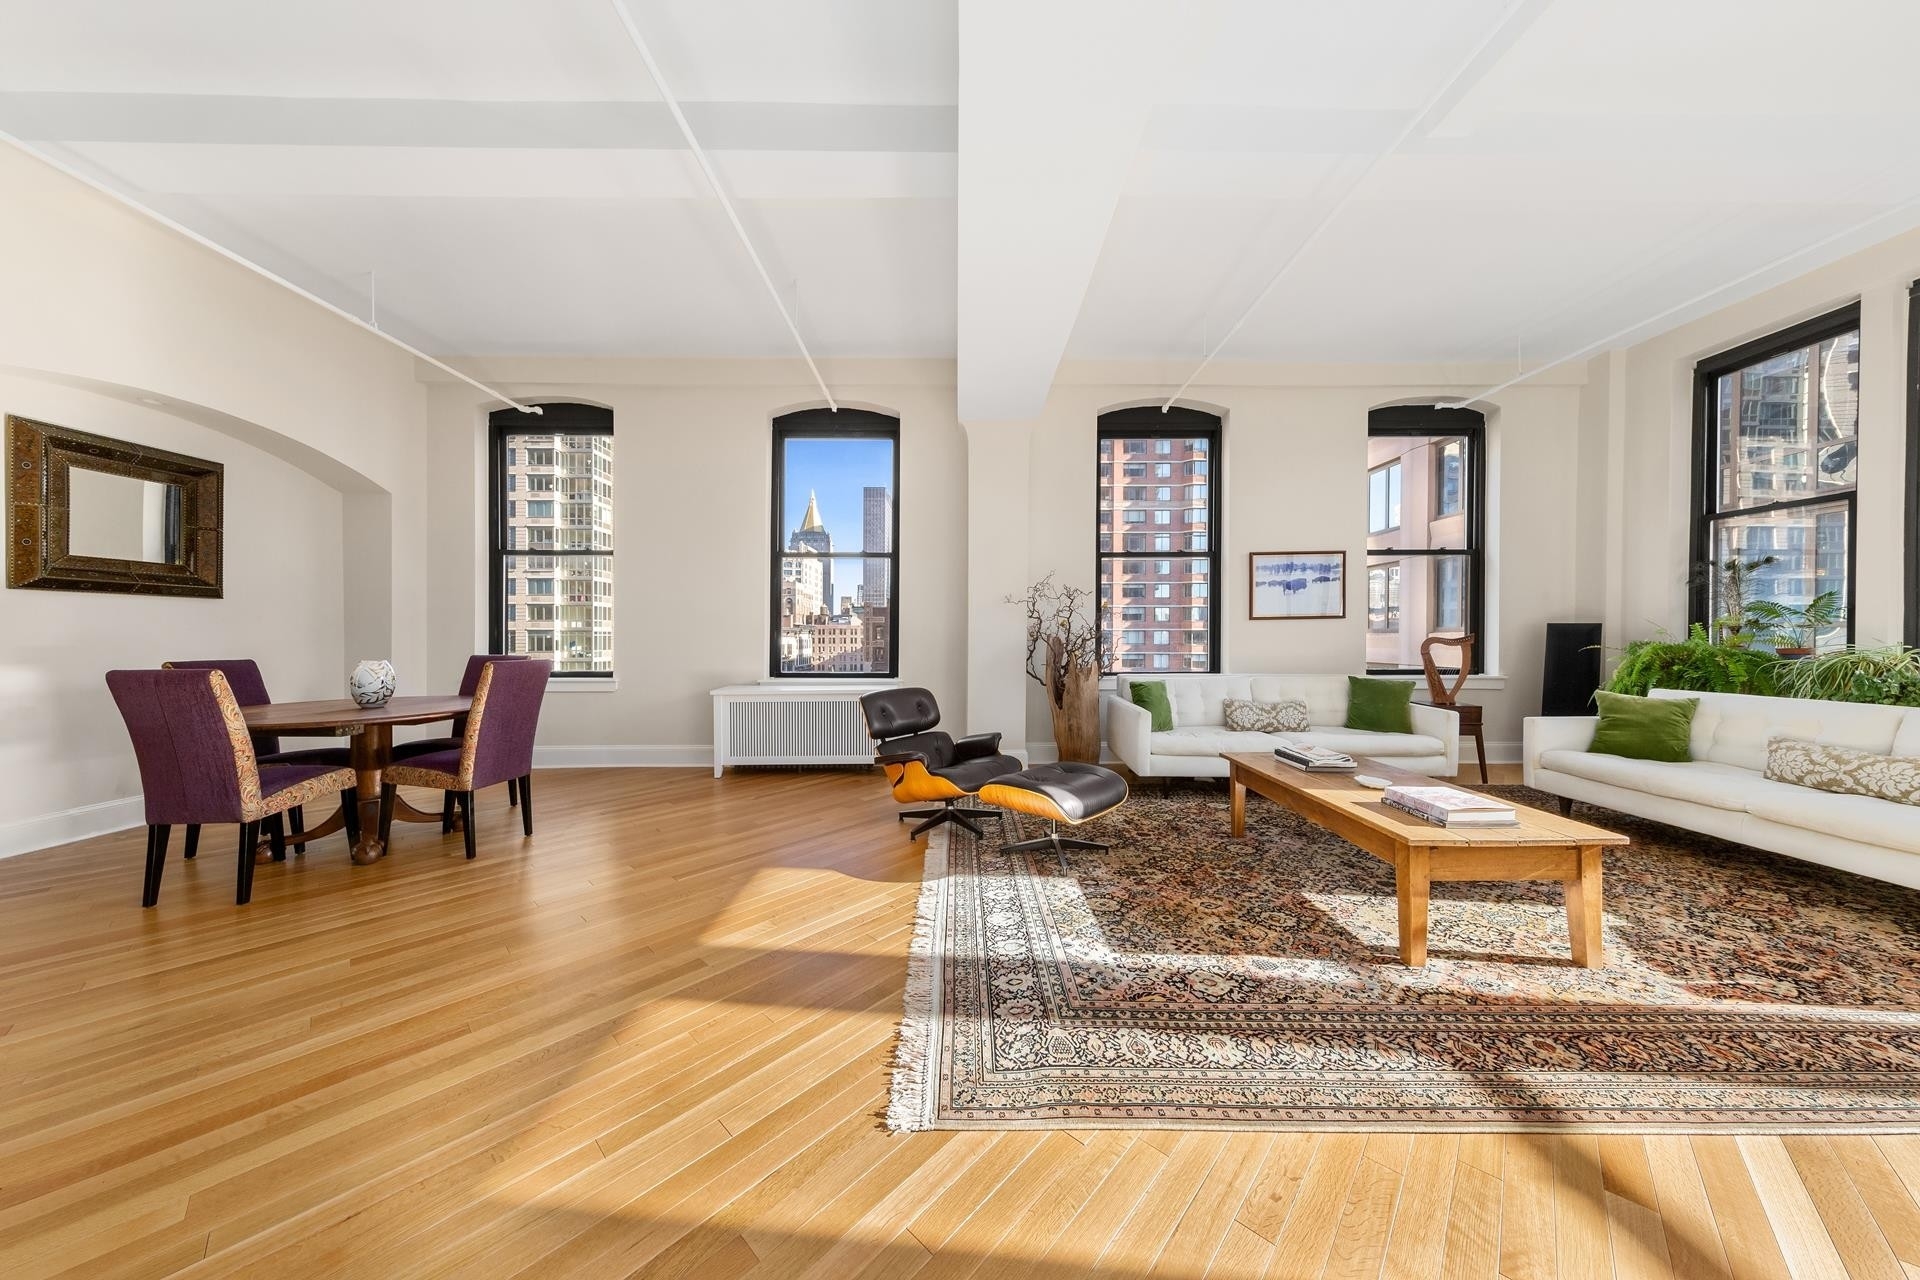 Condominium for Sale at CHELSEA LOFT, 110 W 25TH ST, PENTHOUSE Chelsea, New York, NY 10001